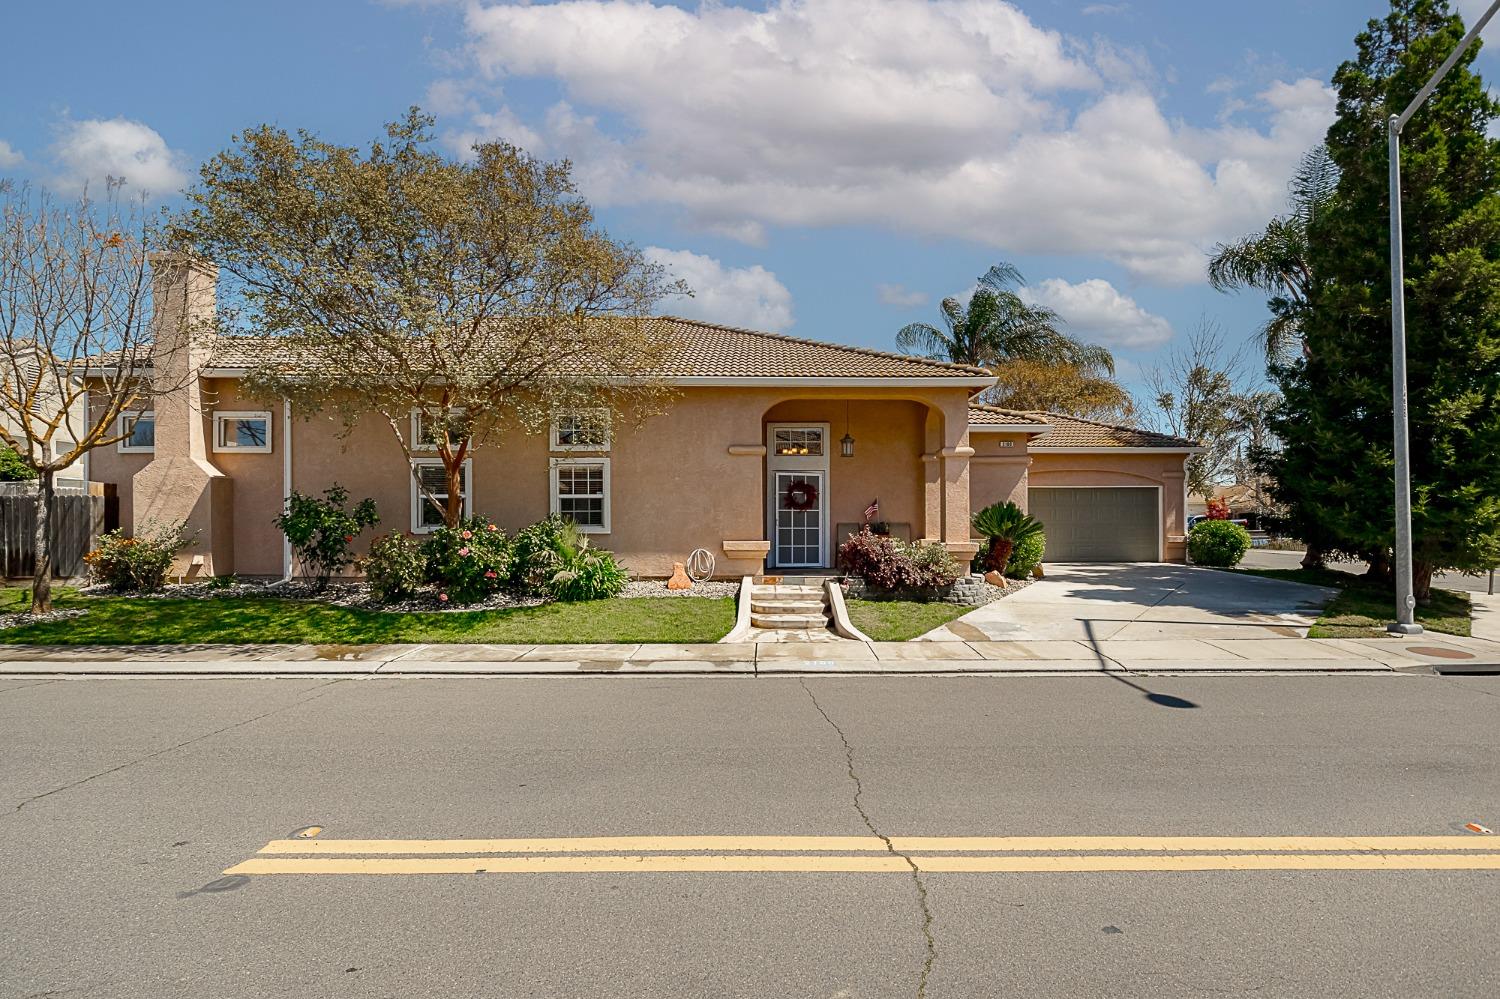 Photo of 2100 Paramont Wy in Modesto, CA